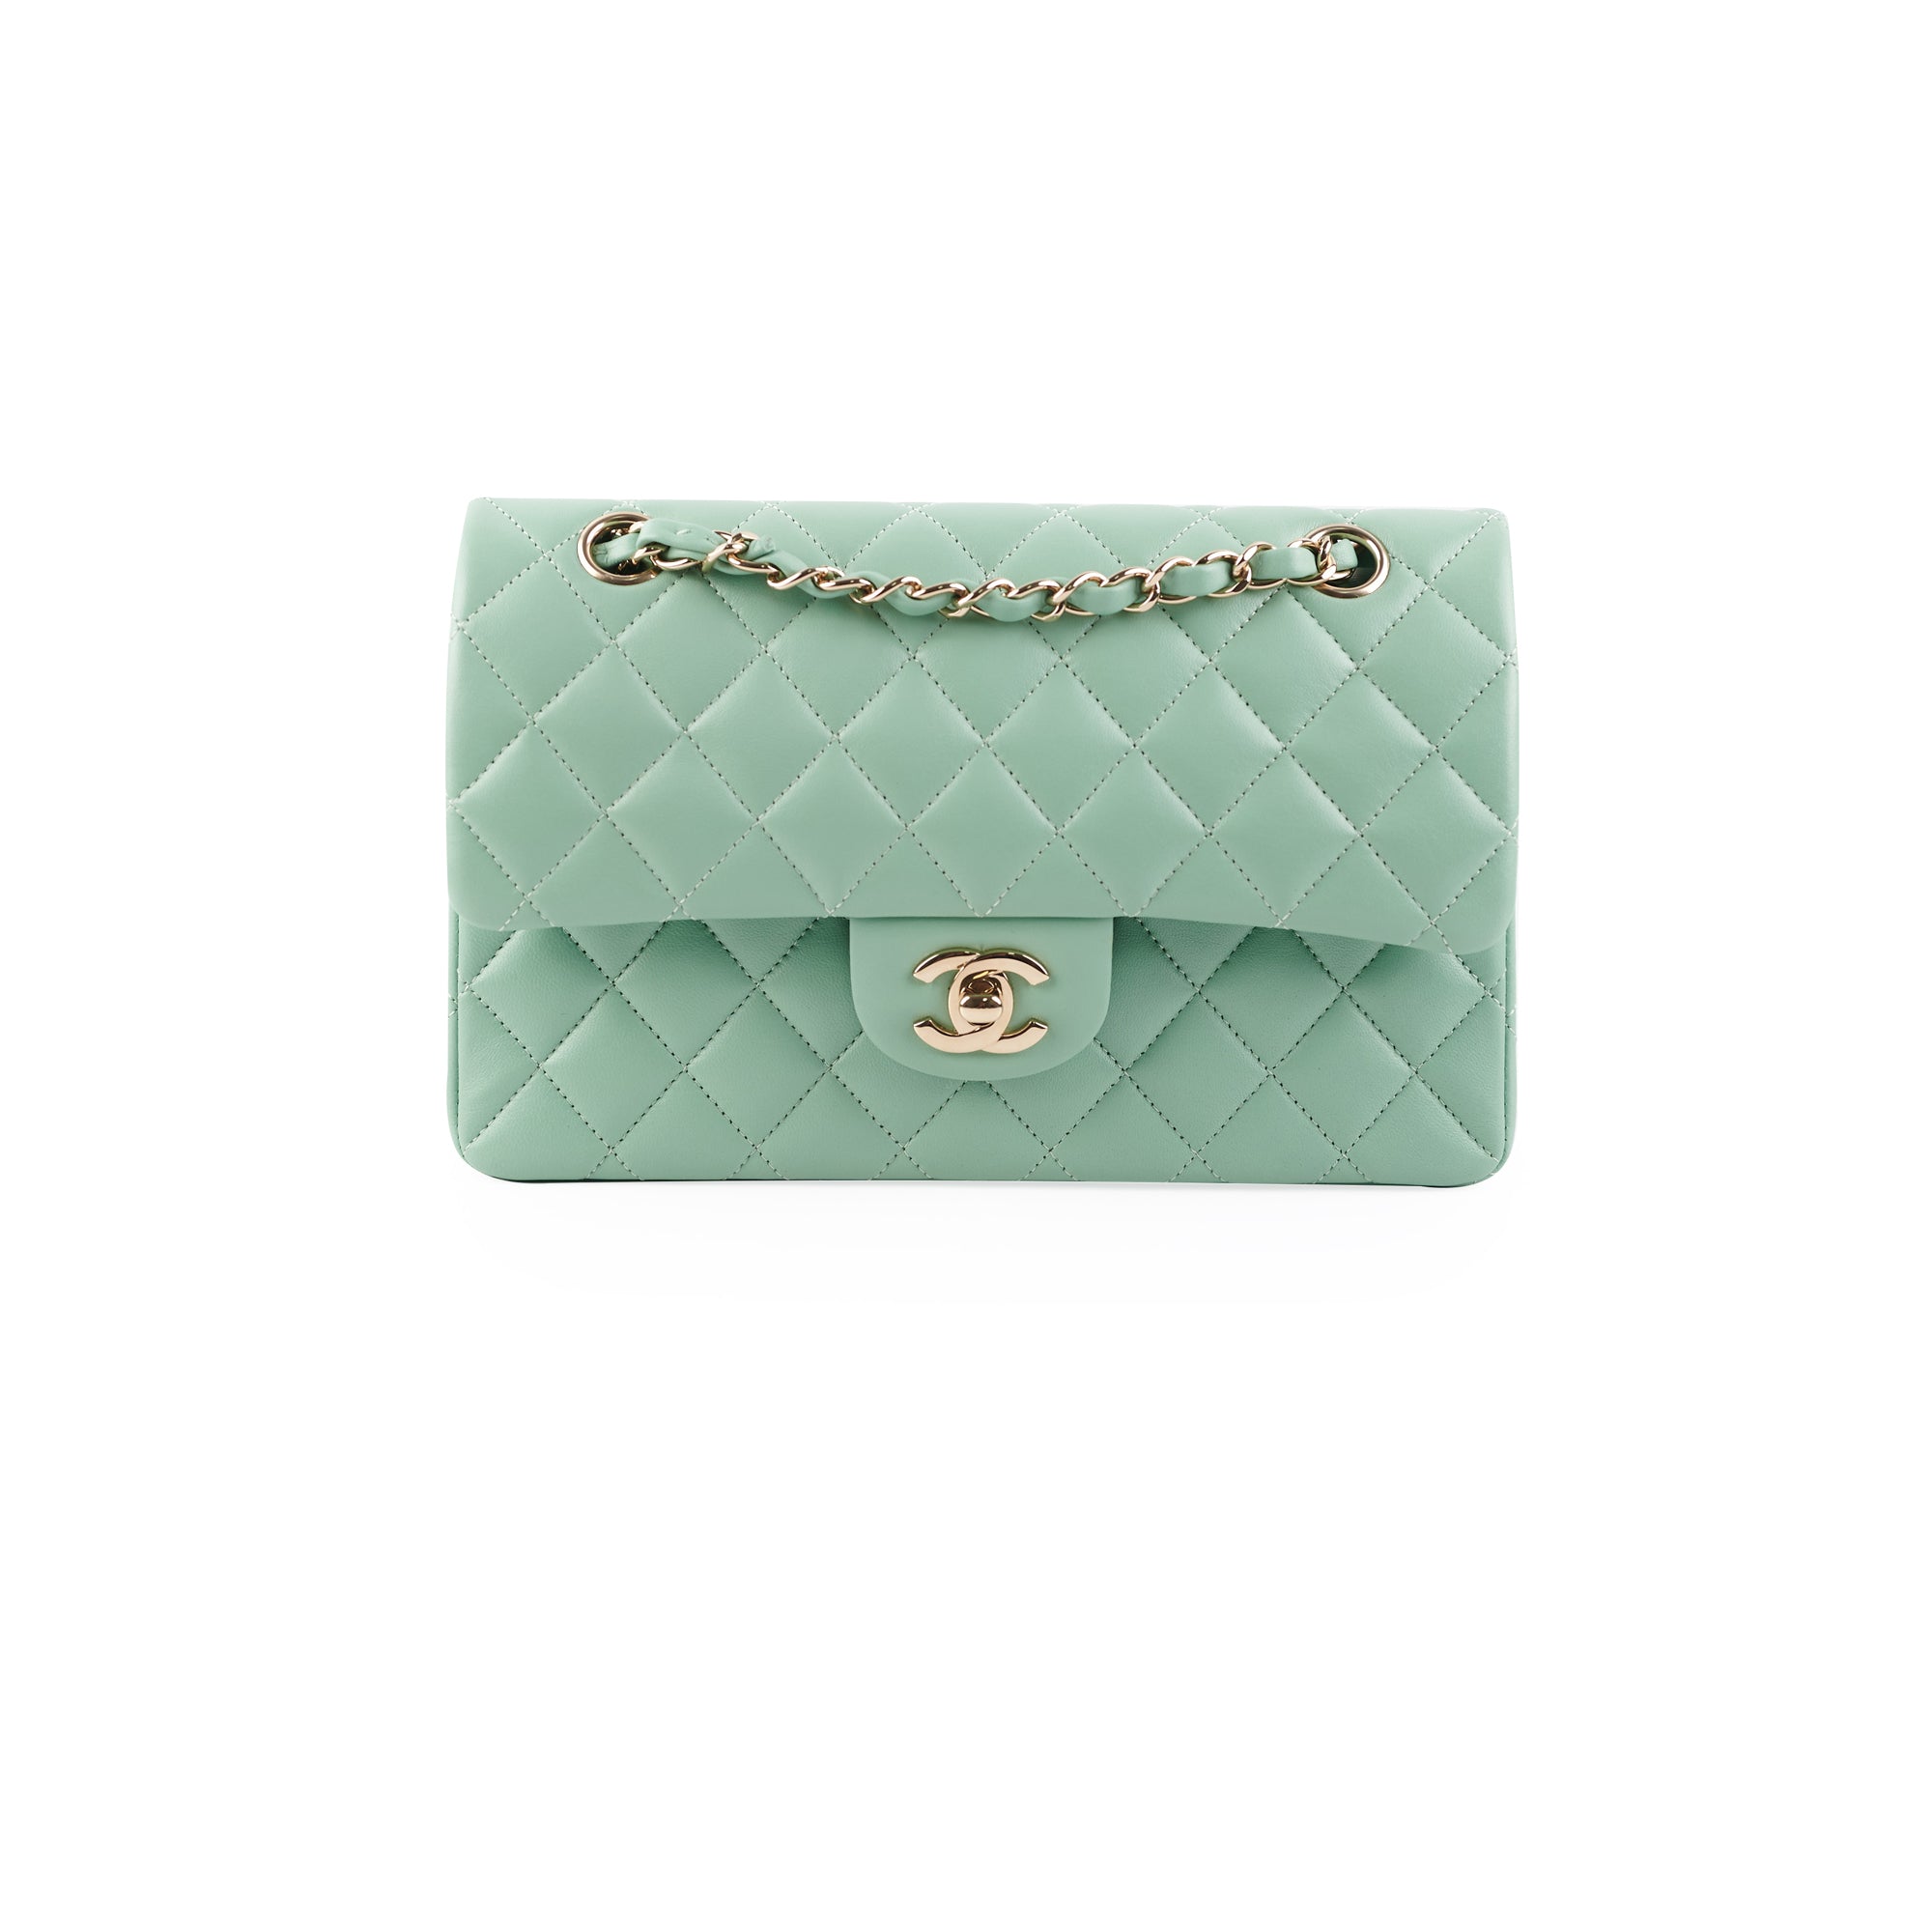 Chanel Small Classic Flap Mint Green - The Purse Affair